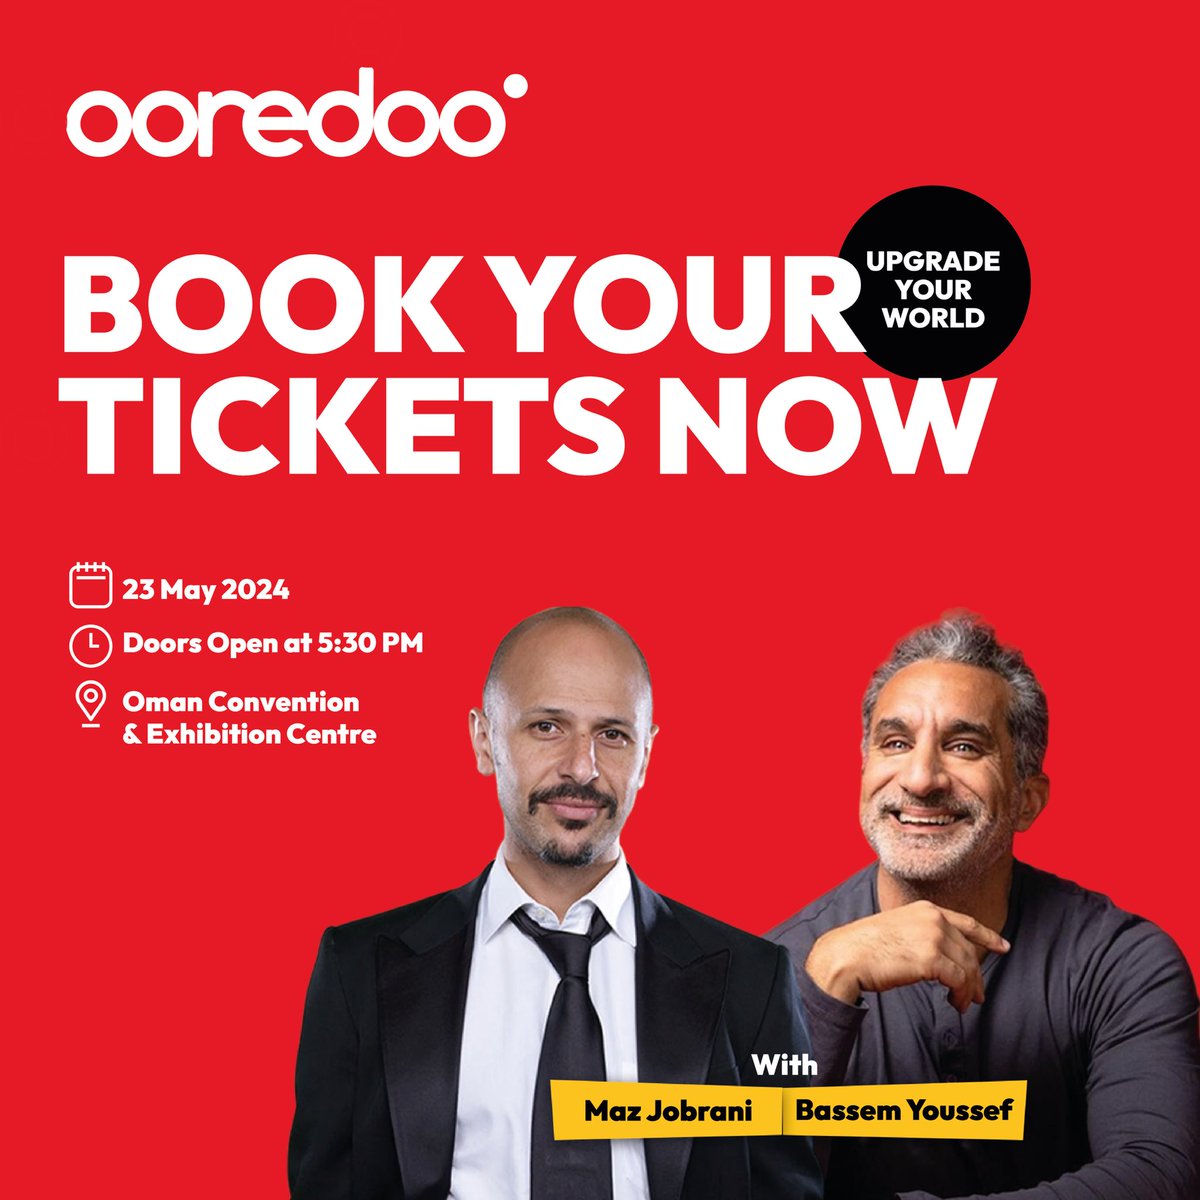 Do something fun and book your ticket for a night of laughs with Bassem Youssef and Maz Jobrani 🎭
Book your ticket via the link 

shorturl.at/ajmyC

Share this post with your family and friends and have a great time together. 👏🏻

#UpgradeYourWorld